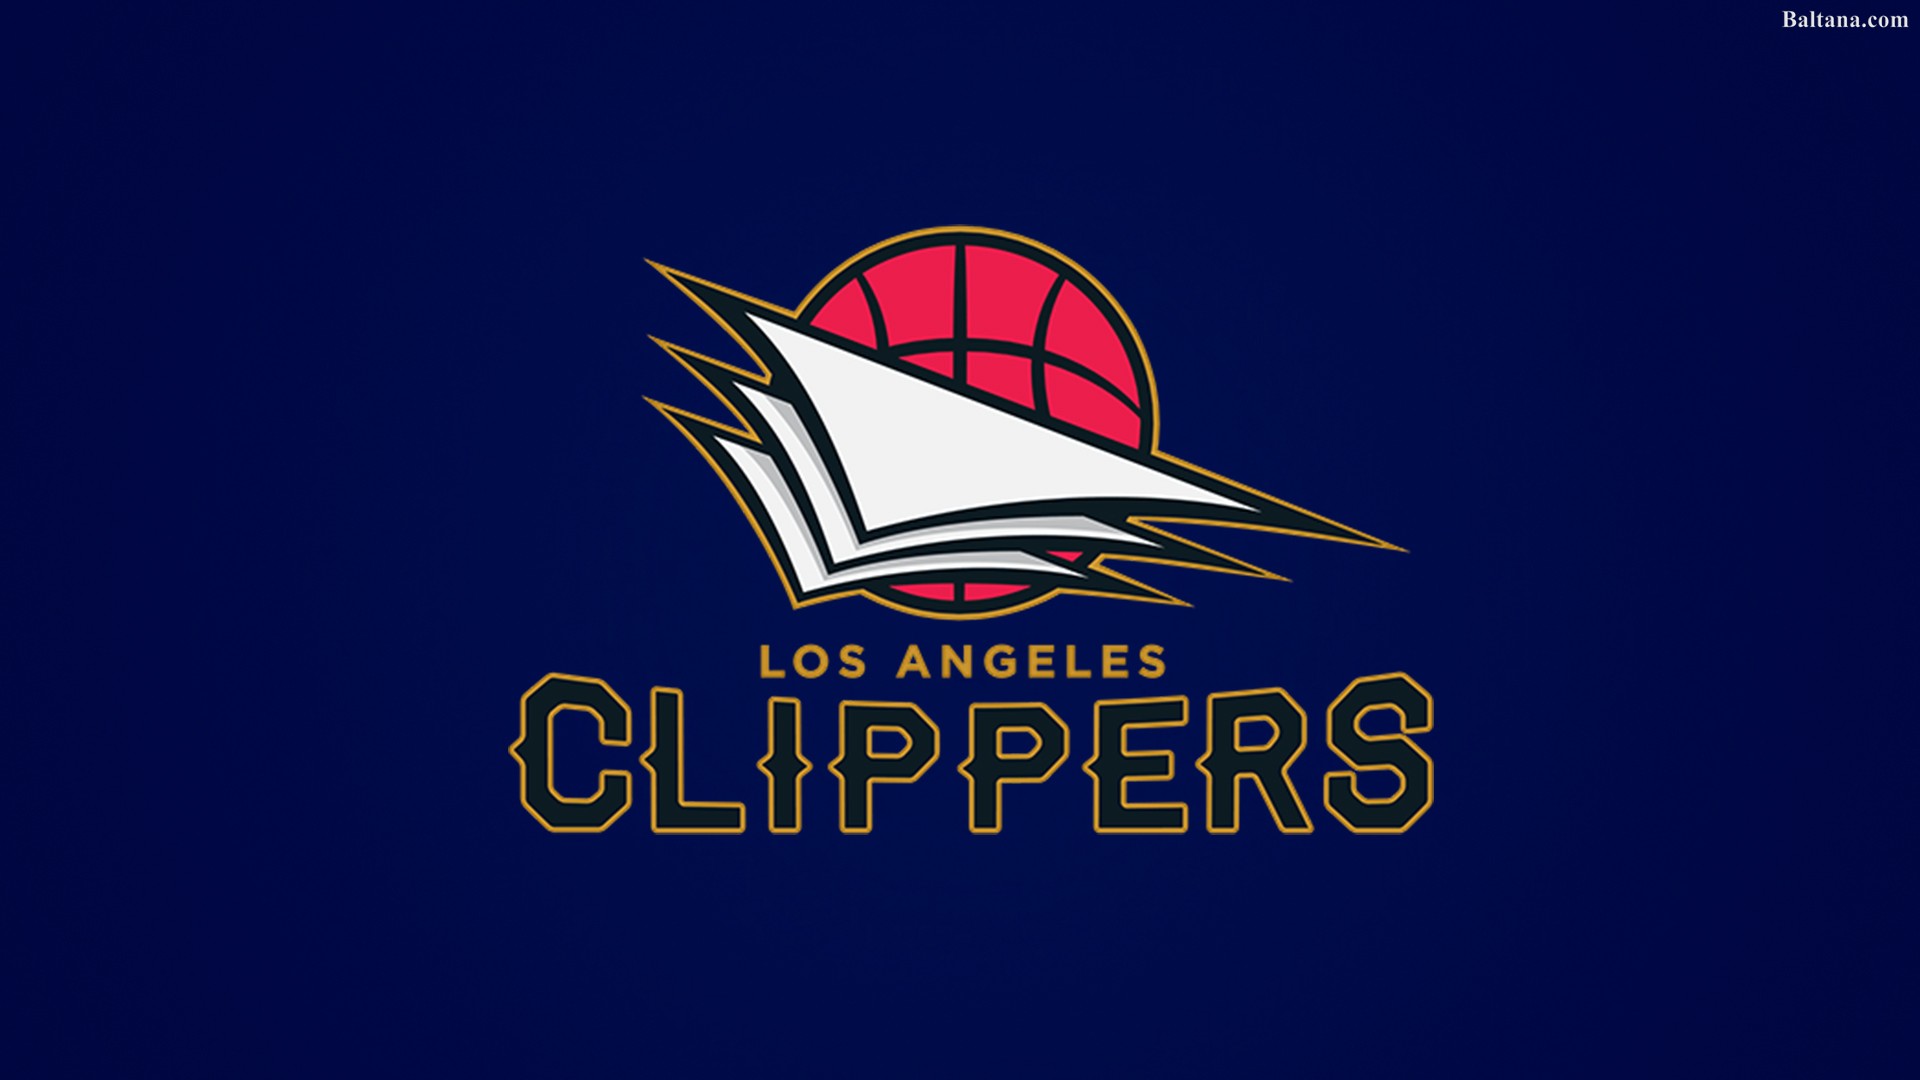 Los Angeles Clippers Wallpaper HD Background Image Pics